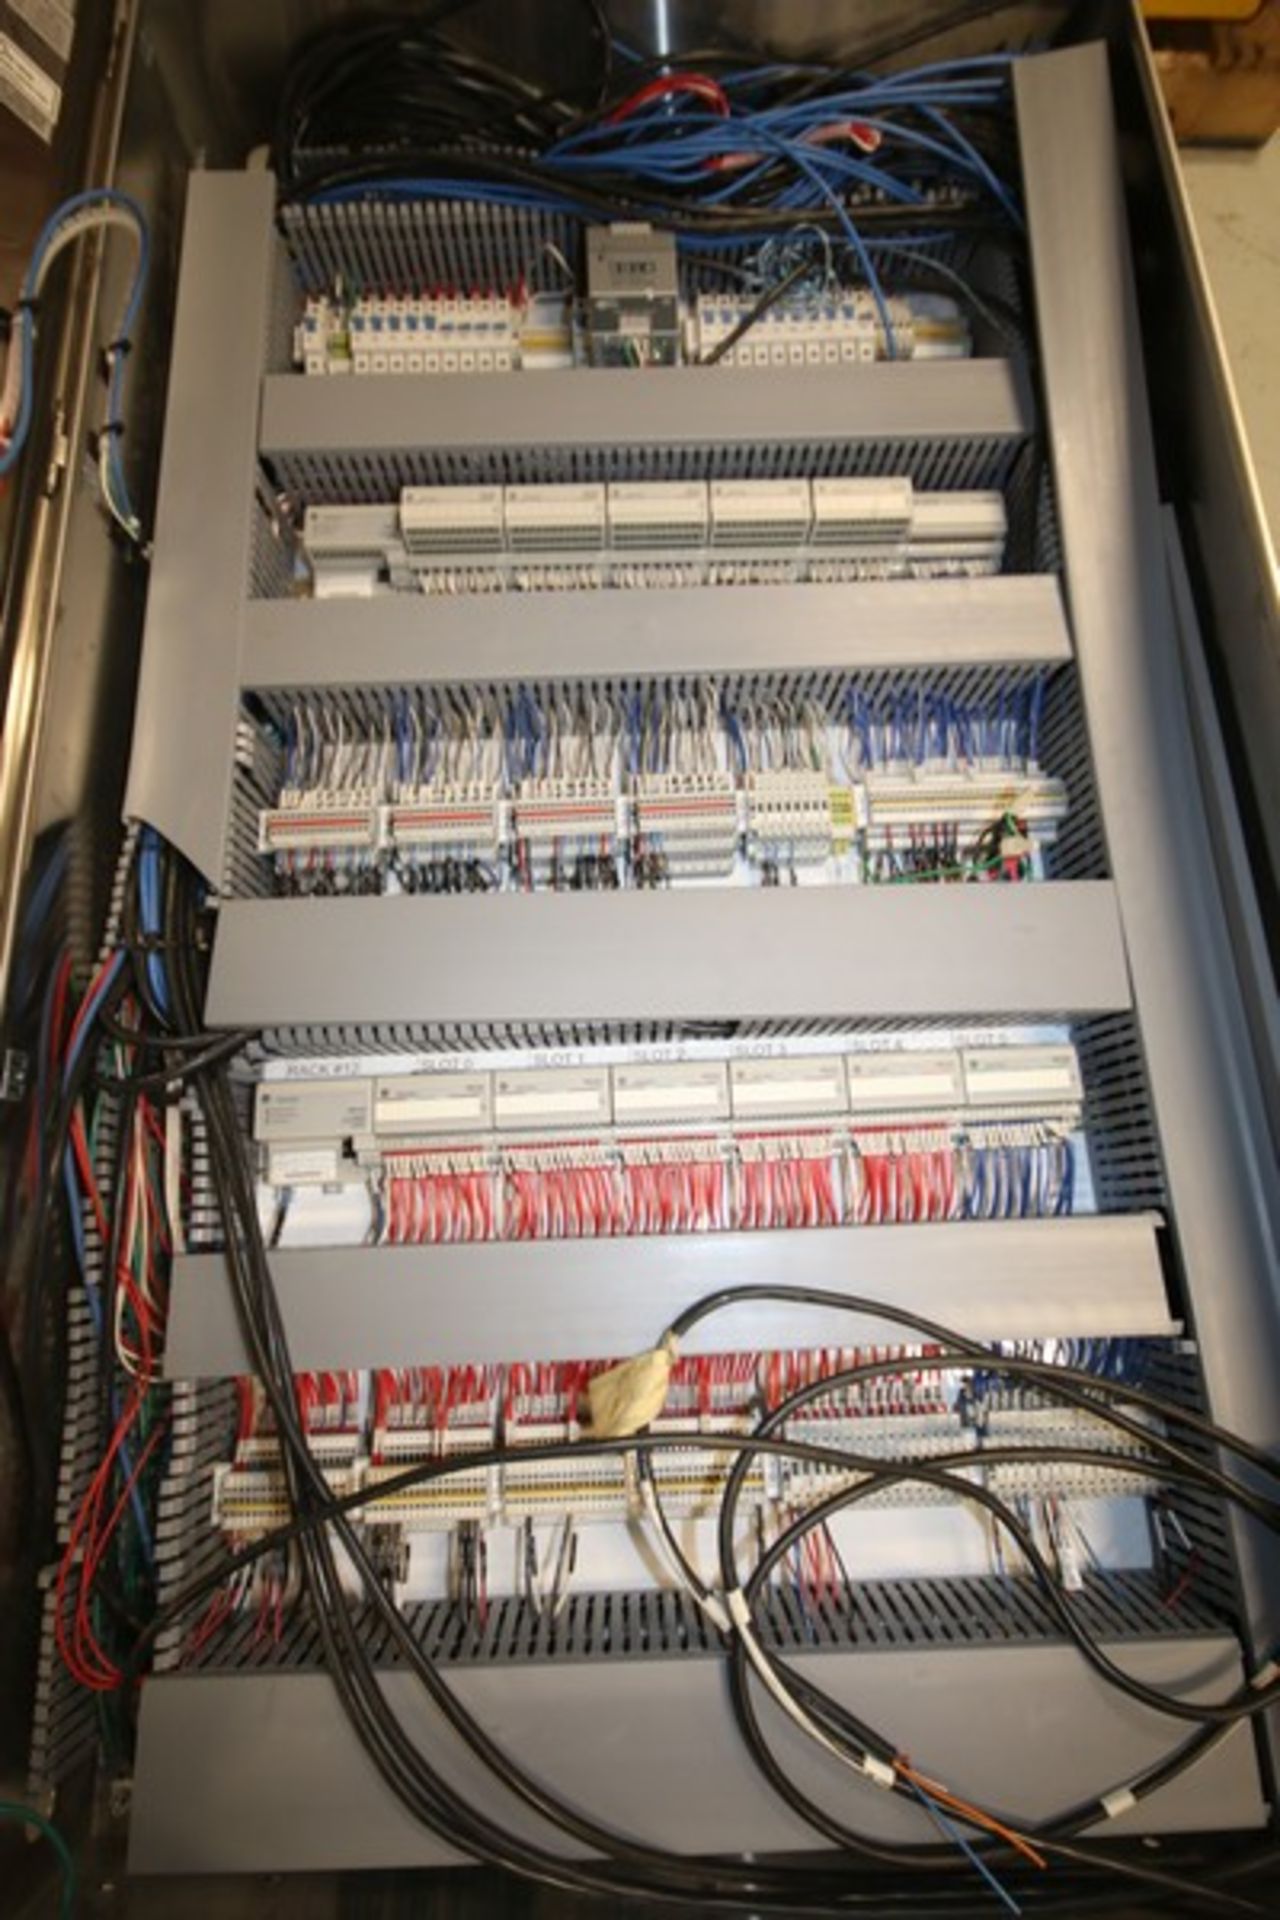 5' H x 3' W x 10" S/S Control Panel with Allen Bradley Flex I/O Type 1794 Series Input & Output - Image 2 of 3